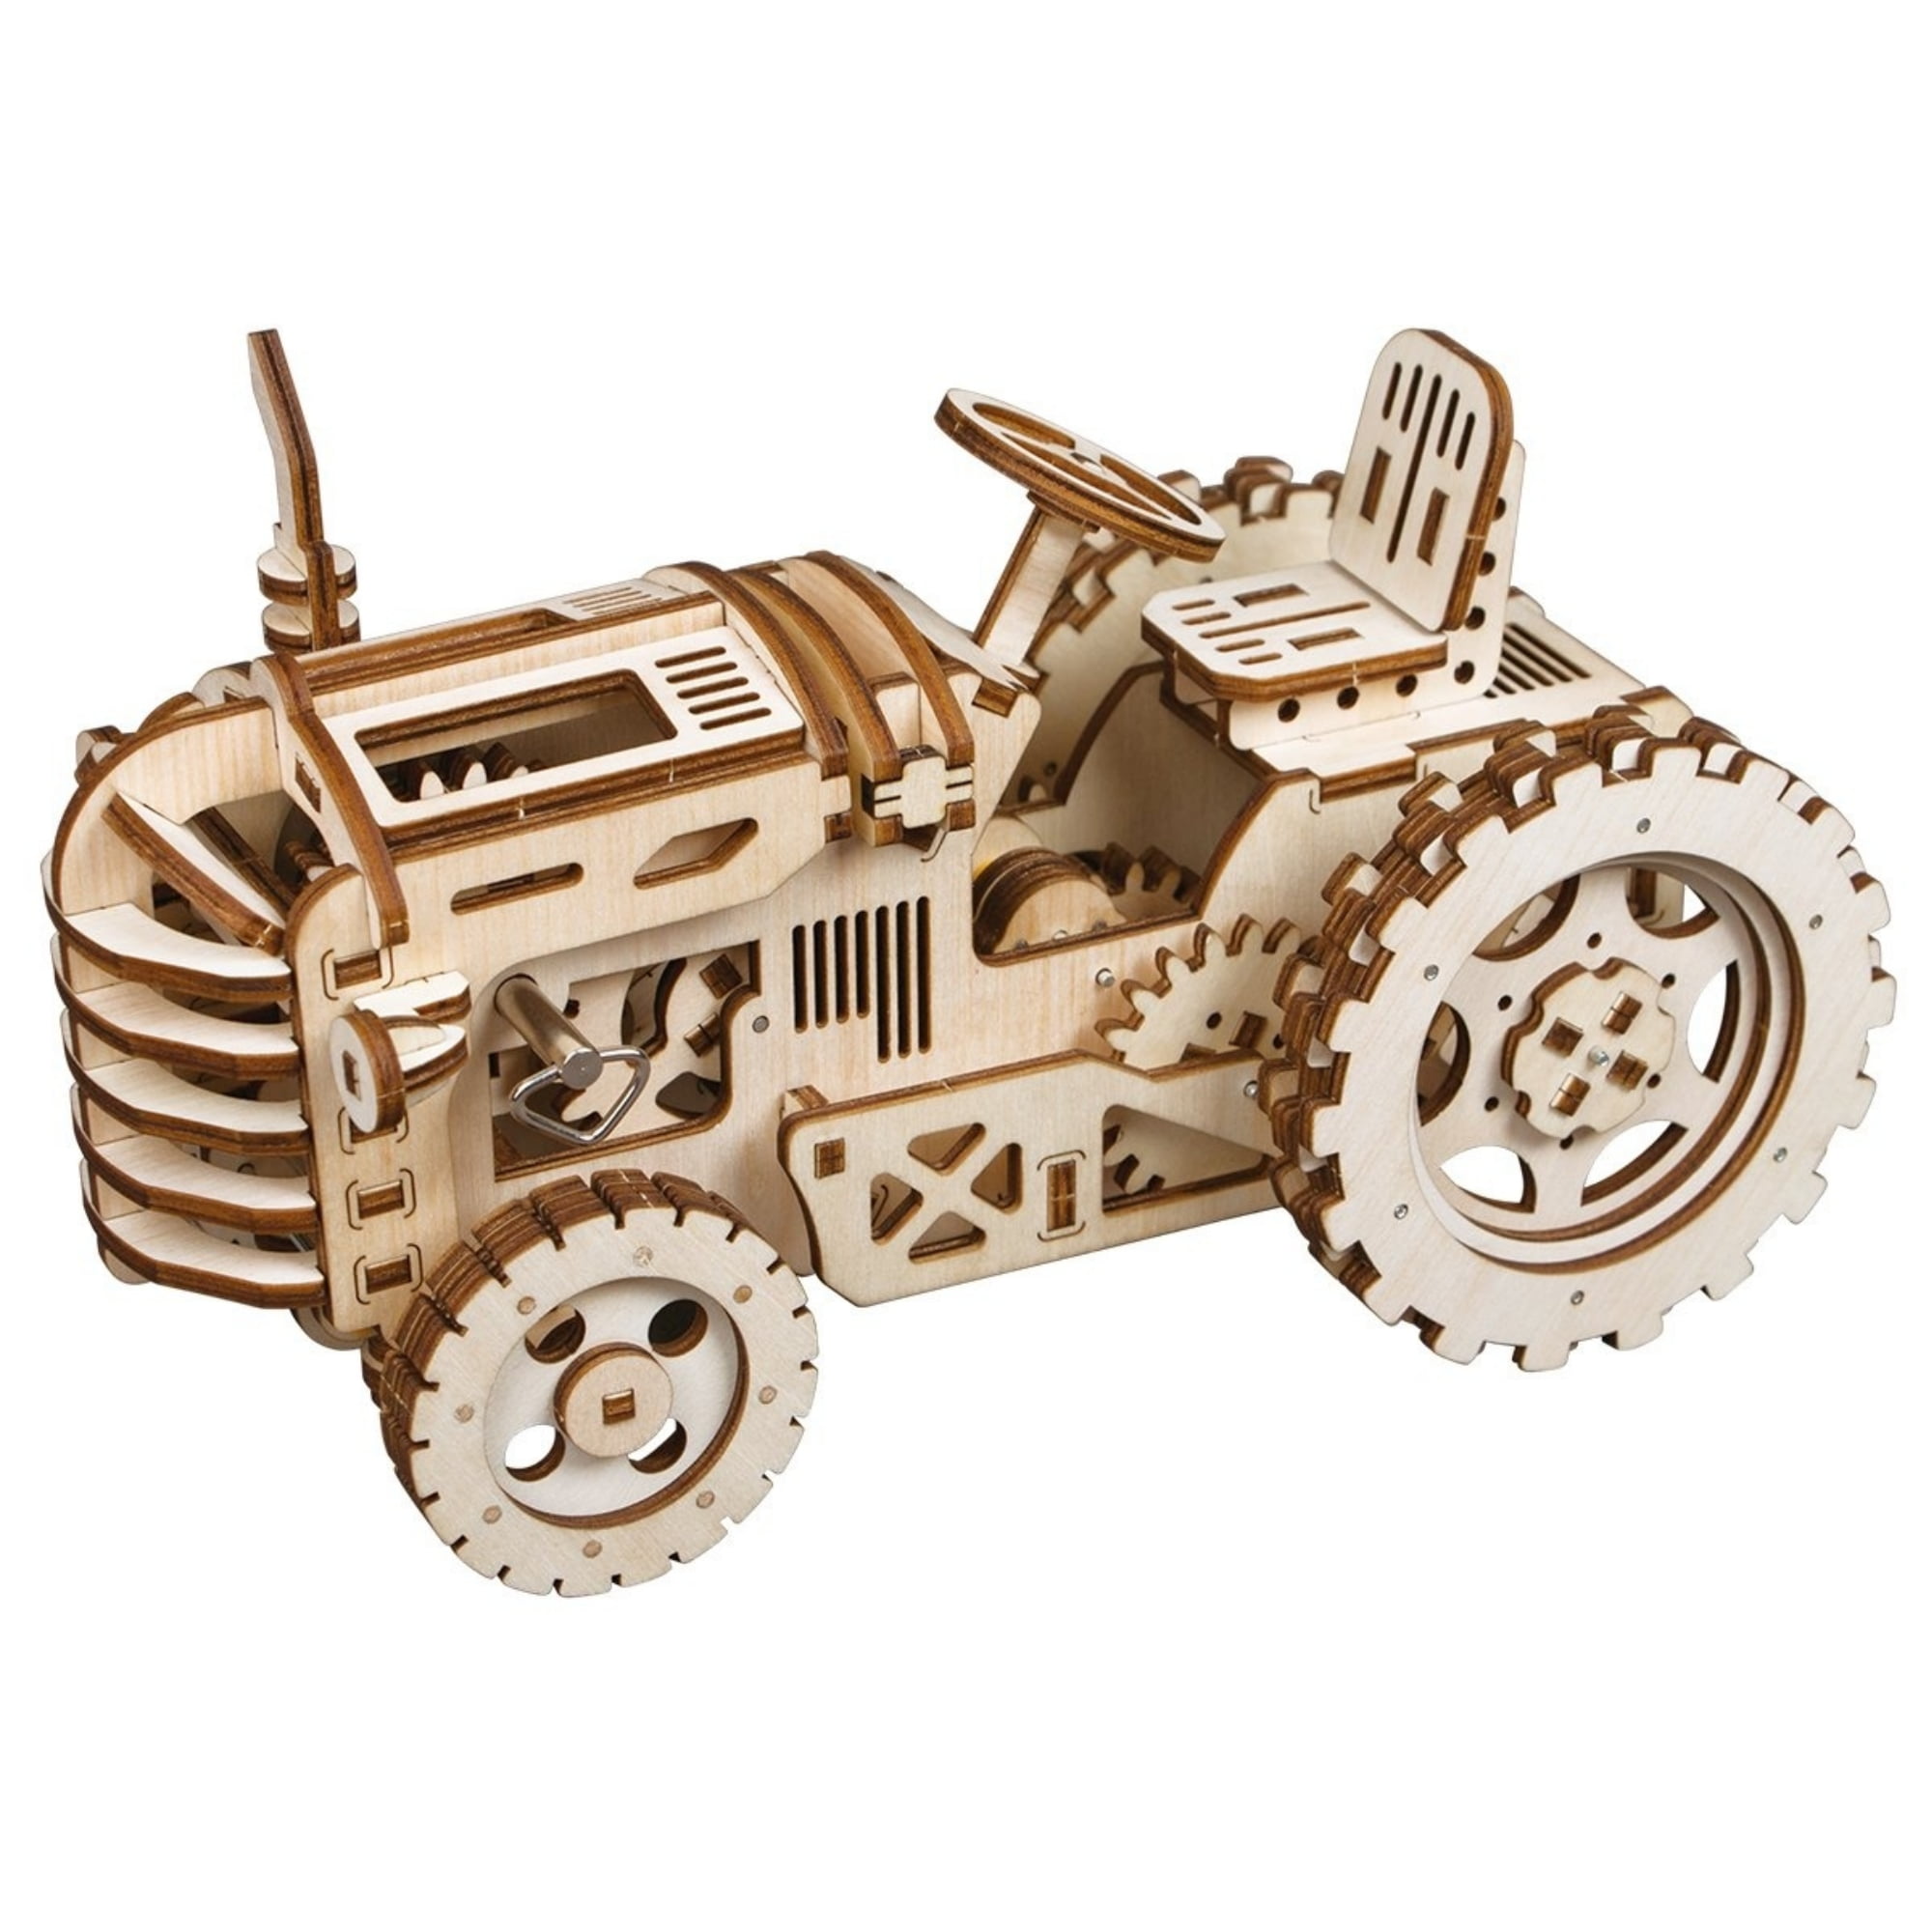 3D DIY Wooden Puzzle Laser Cut Mechanically Driven Model Handmade Crafts Kid Toy 